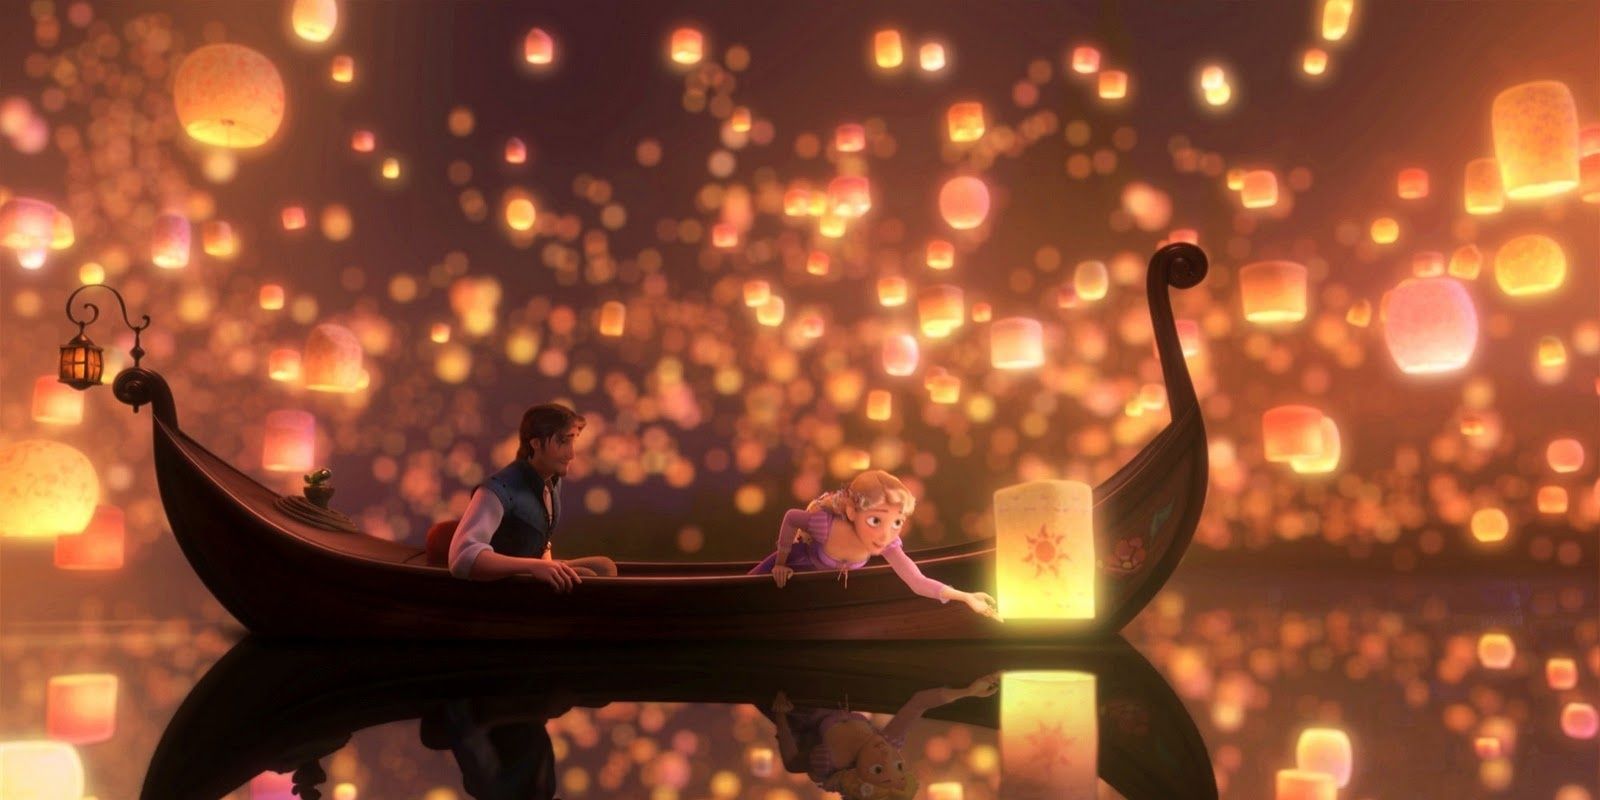 rapunzel and flynn in the boat amongst the lanterns in tangled